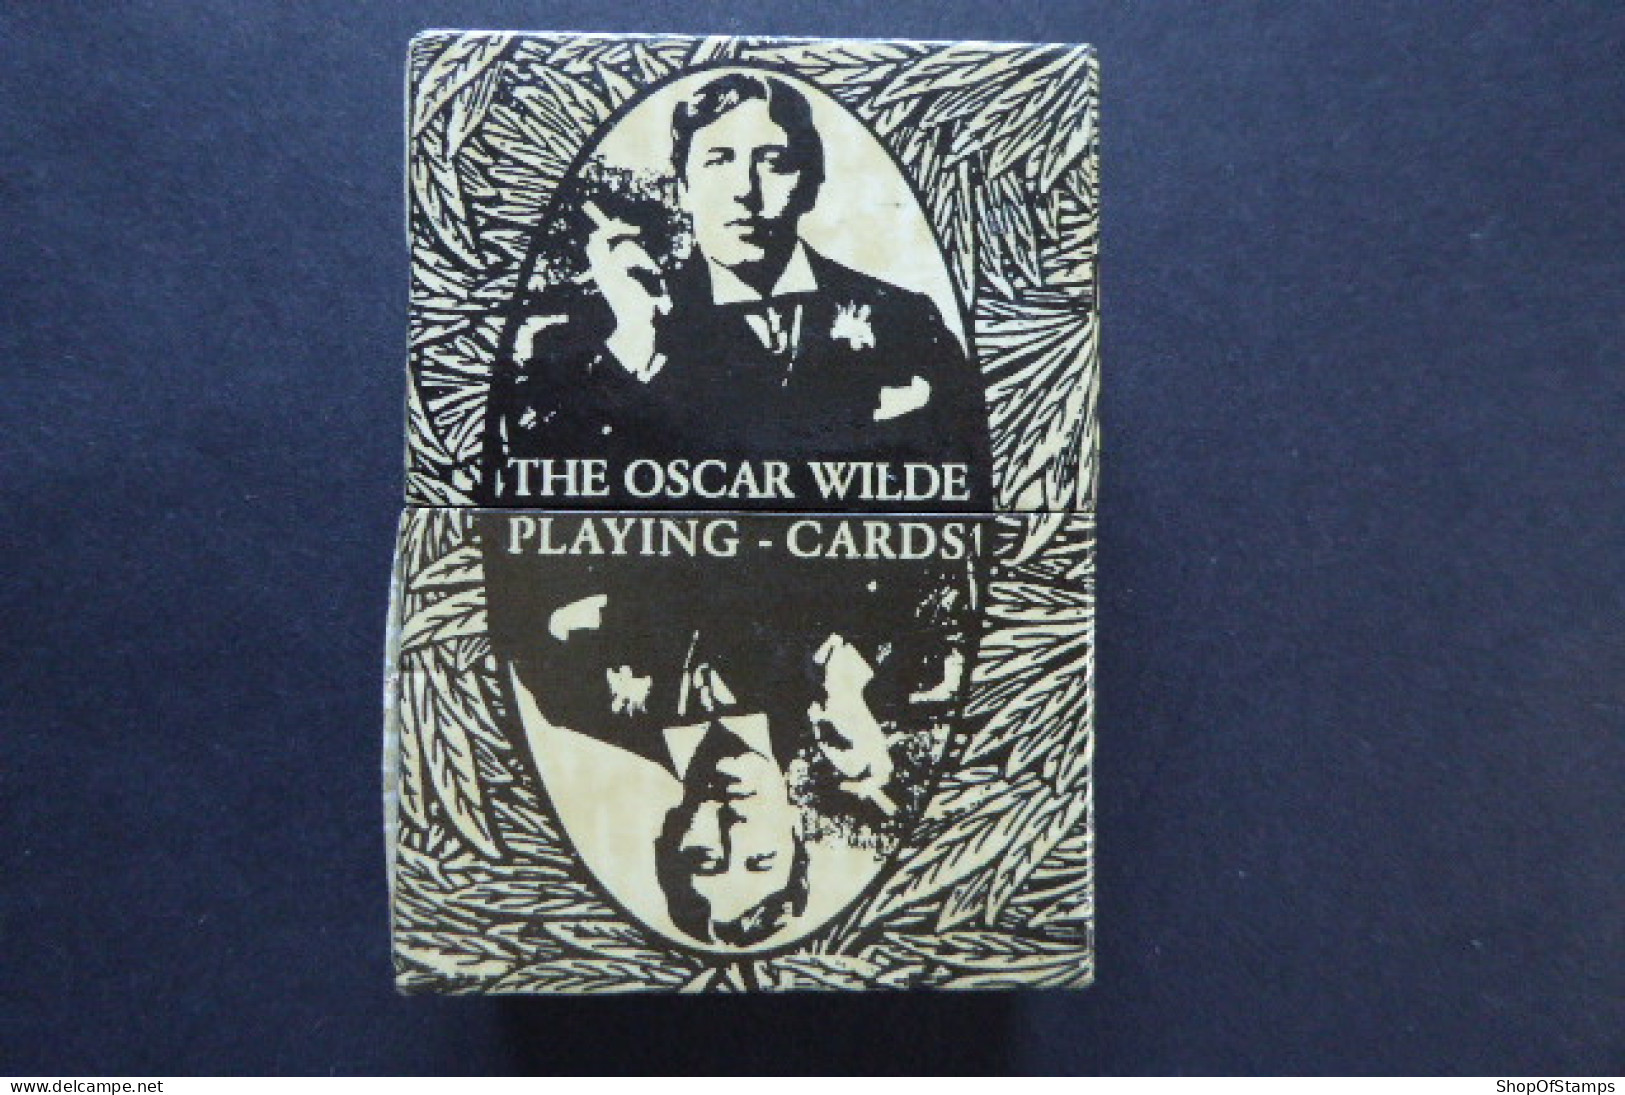 CARDS: OSCAR WILDE PLAYING CARDS BY RICHARD ELLMANN & R FANTO PACKED WITH CASE AND LEAFLET - Casinokarten